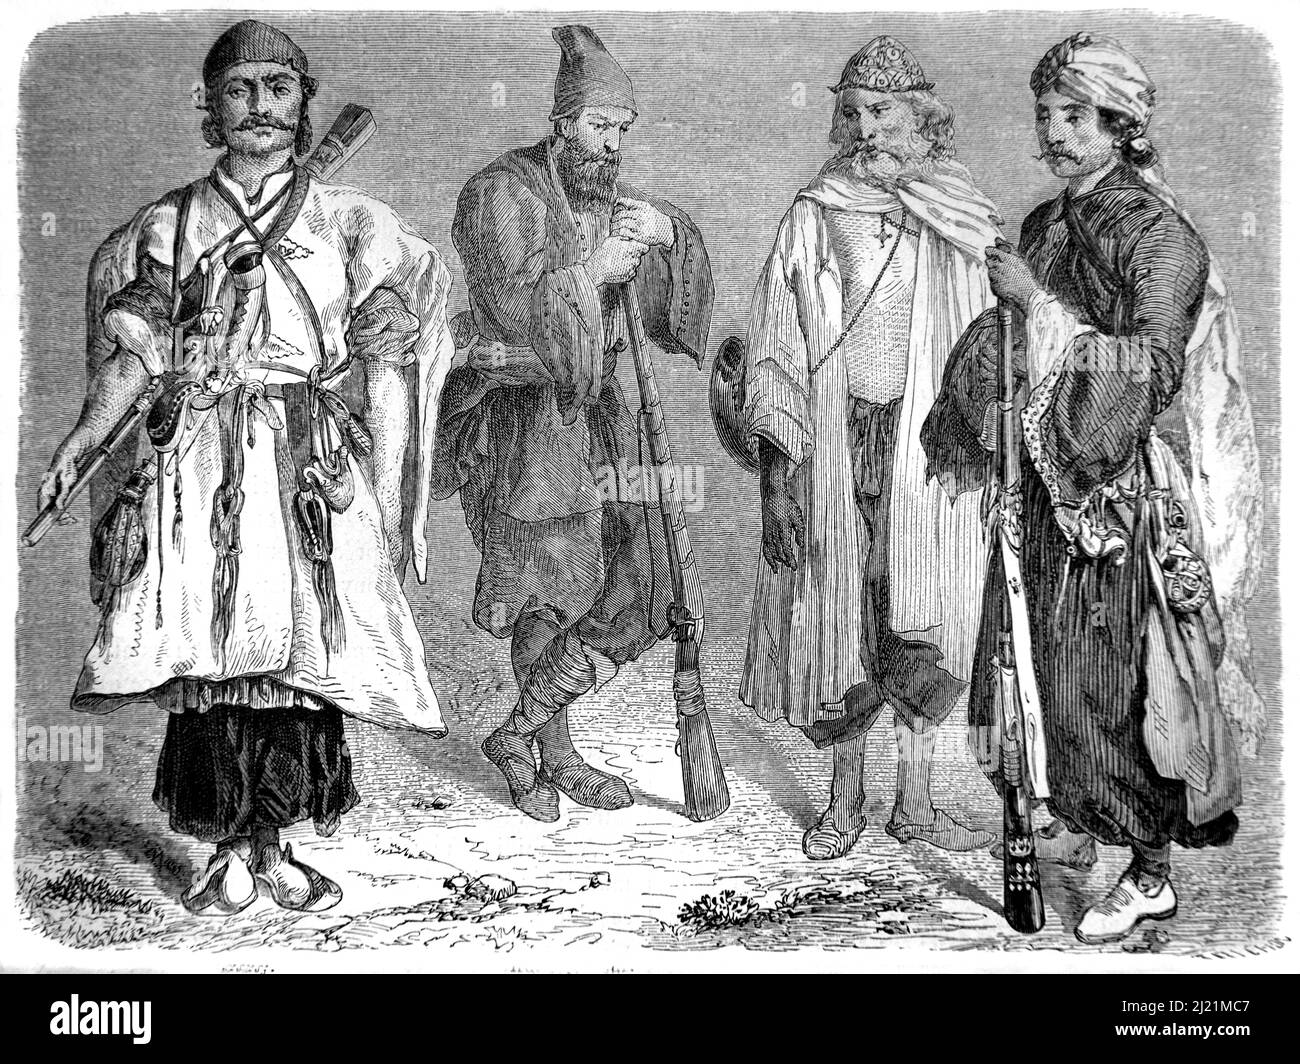 Portraits of Persian Men or Iranian Men Wearing Traditional Iranian Clothes or Ethnic Costume Including a Kurd, a Priest or Pastor, a Dervish and a Nomad, Iran. Vintage Illustration or Engraving 1860. Stock Photo